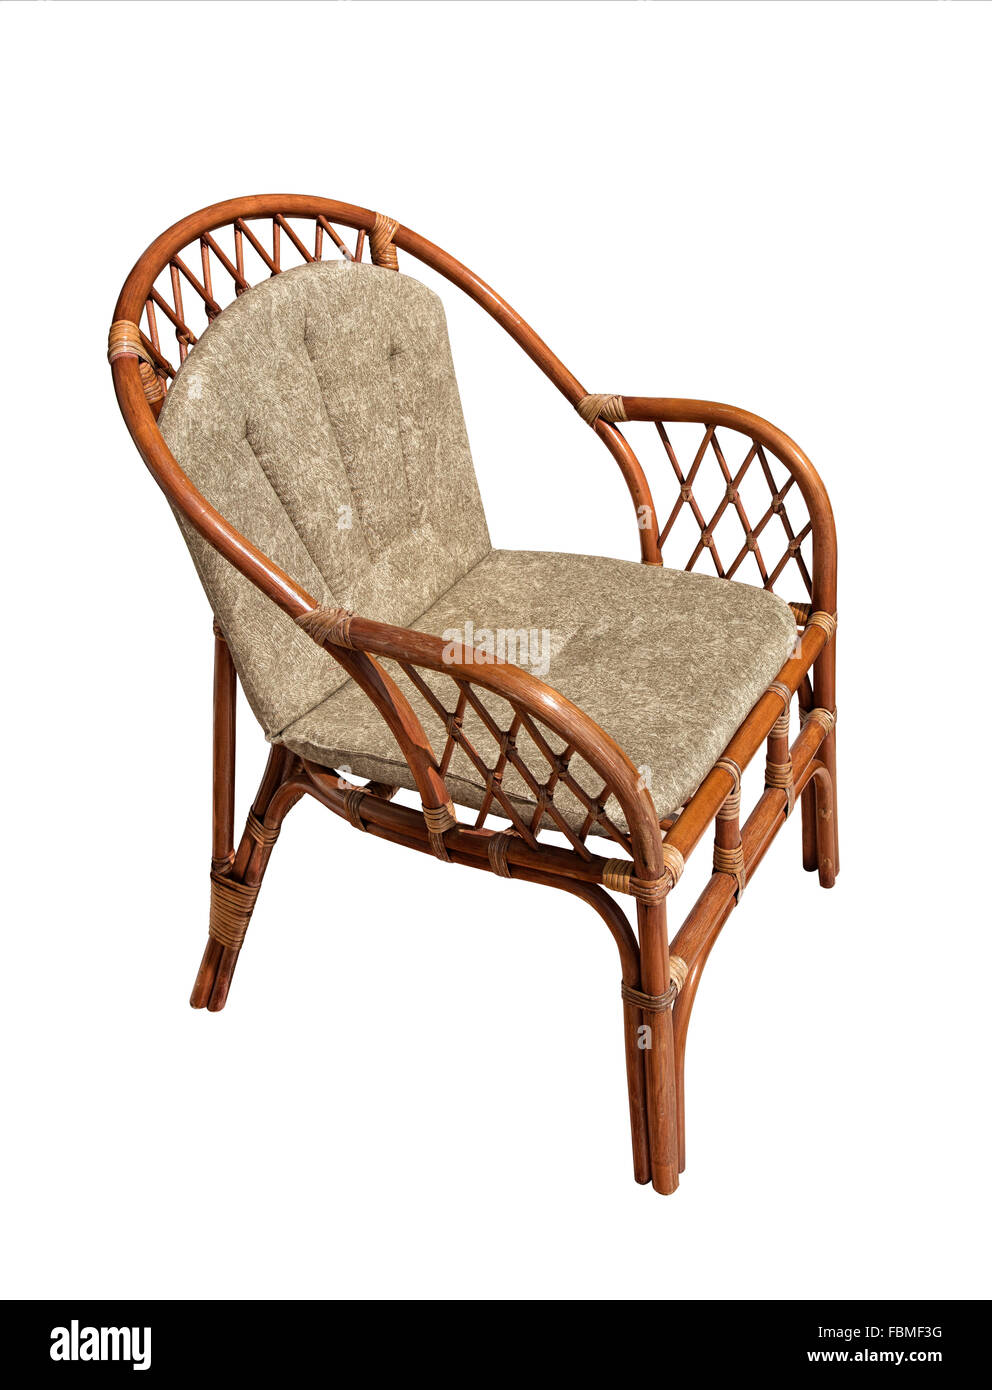 Brown wicker chair isolated over white background Stock Photo